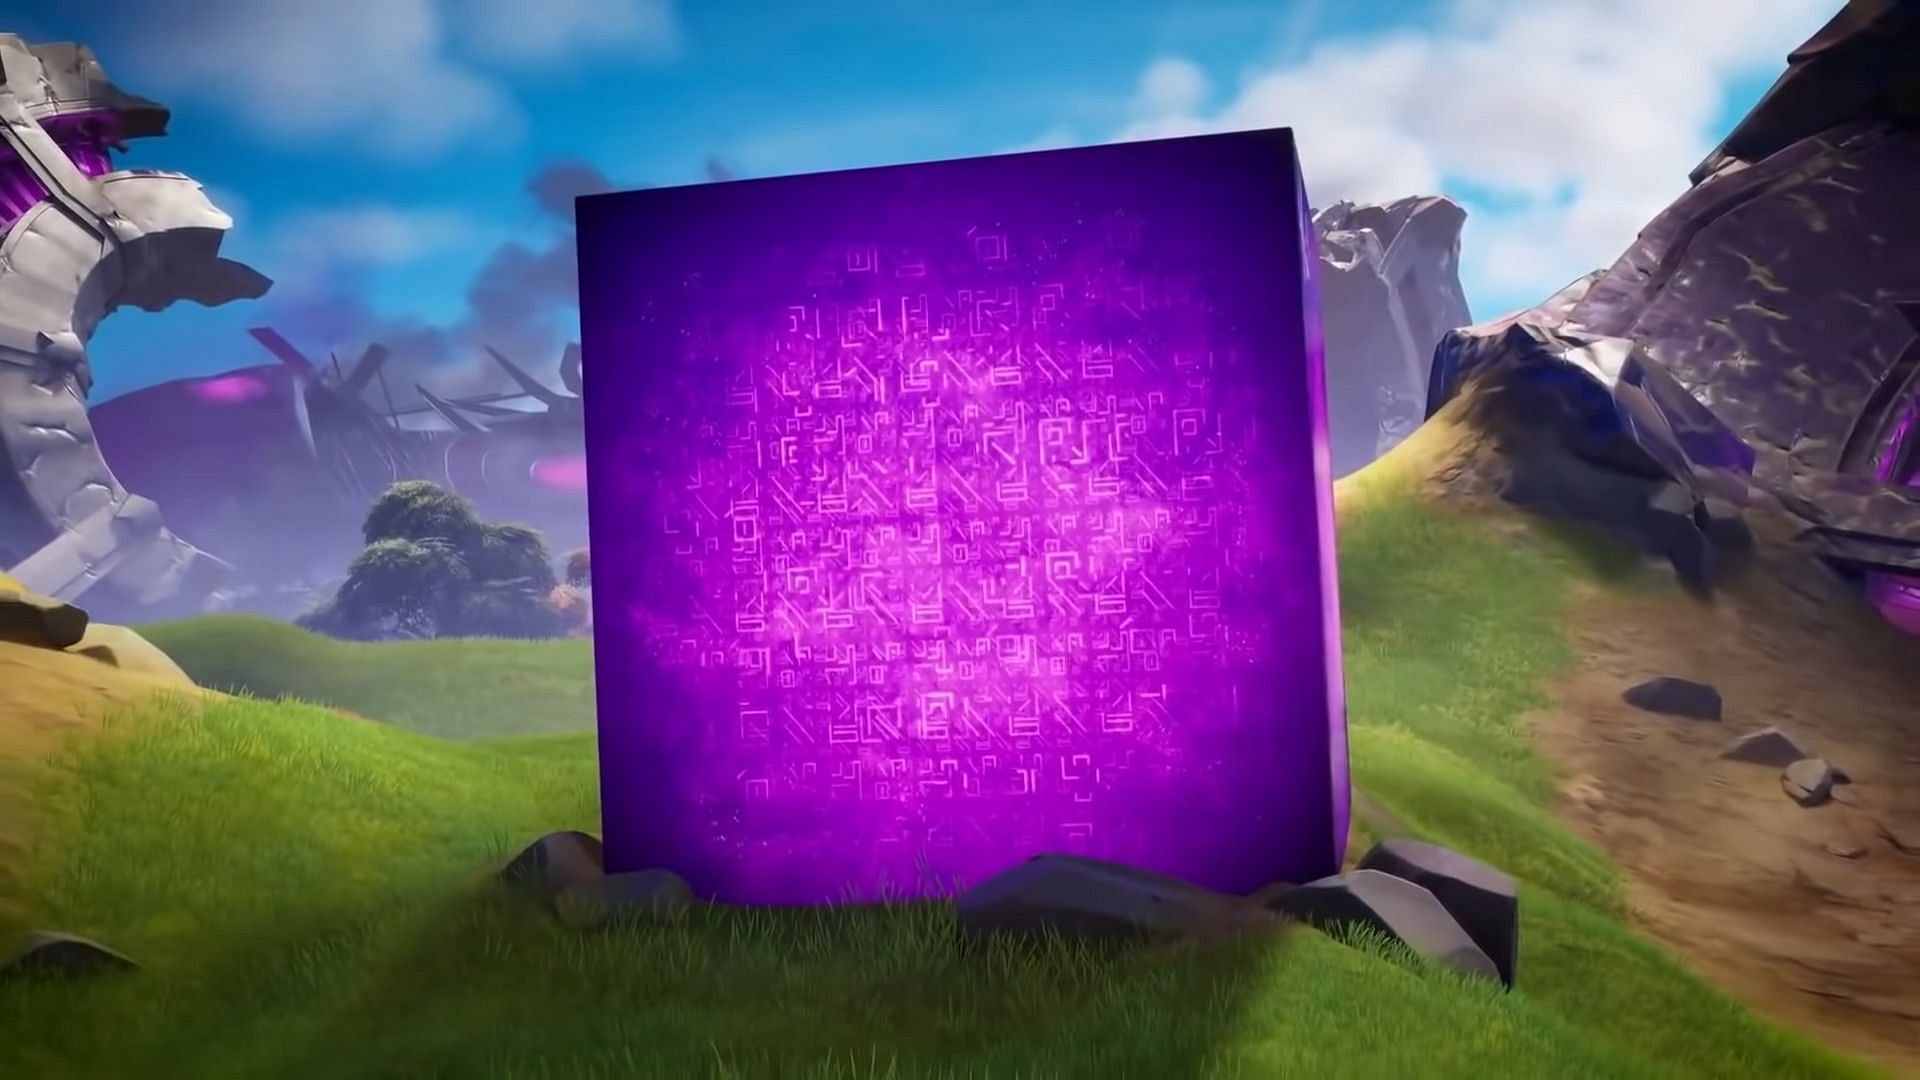 Kevin The Cube